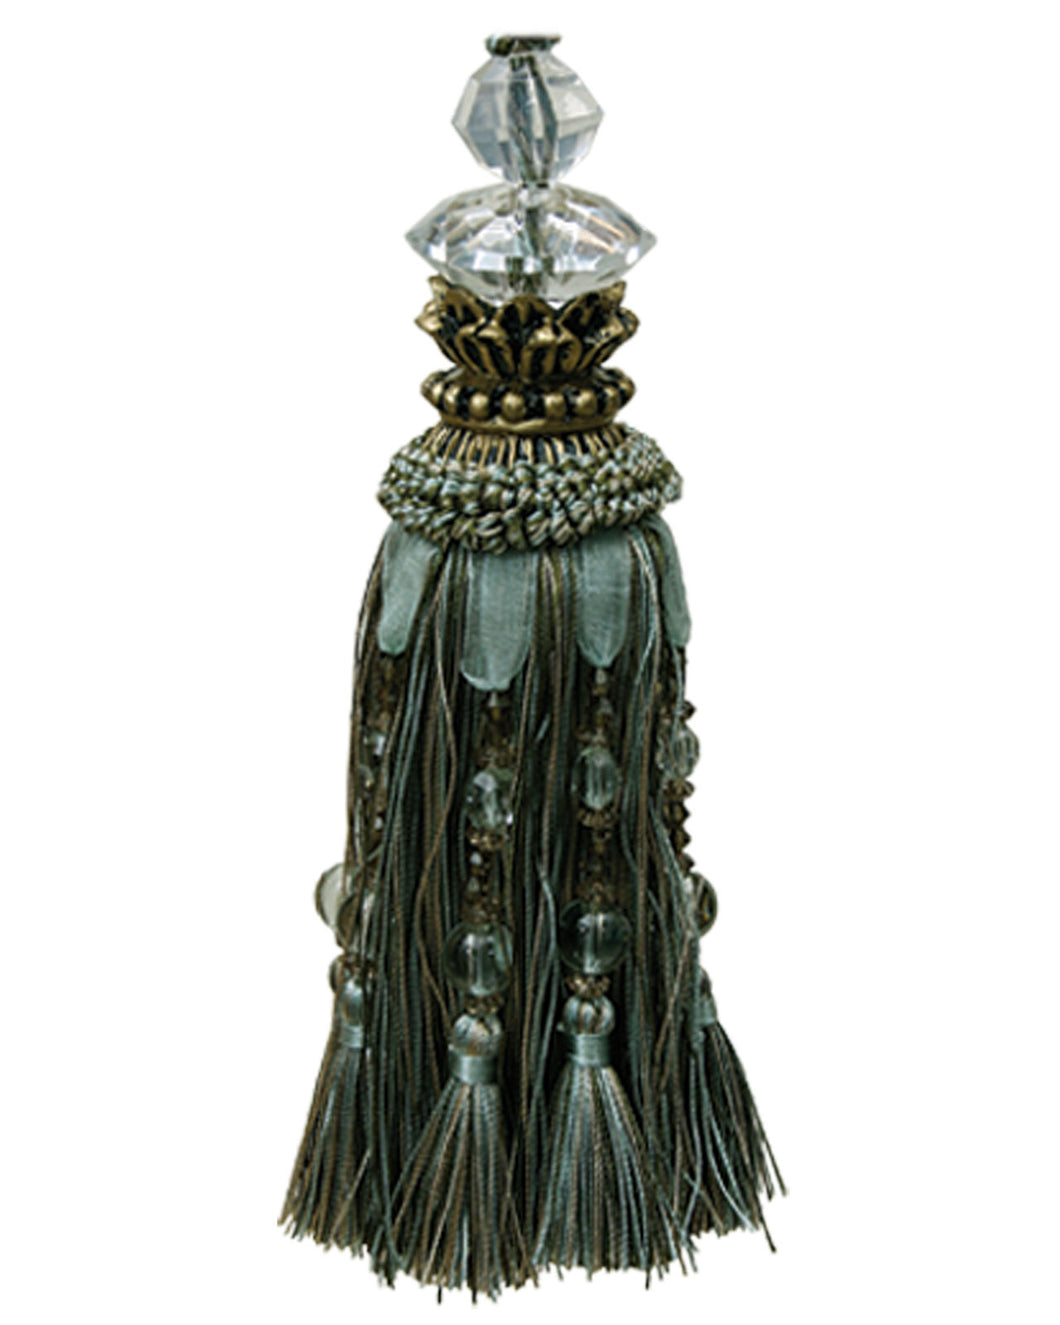 Large Tassel with Faceted Glass Top and Beads - Olive - Decorative Tassel for Antique Key or Door BOGT01